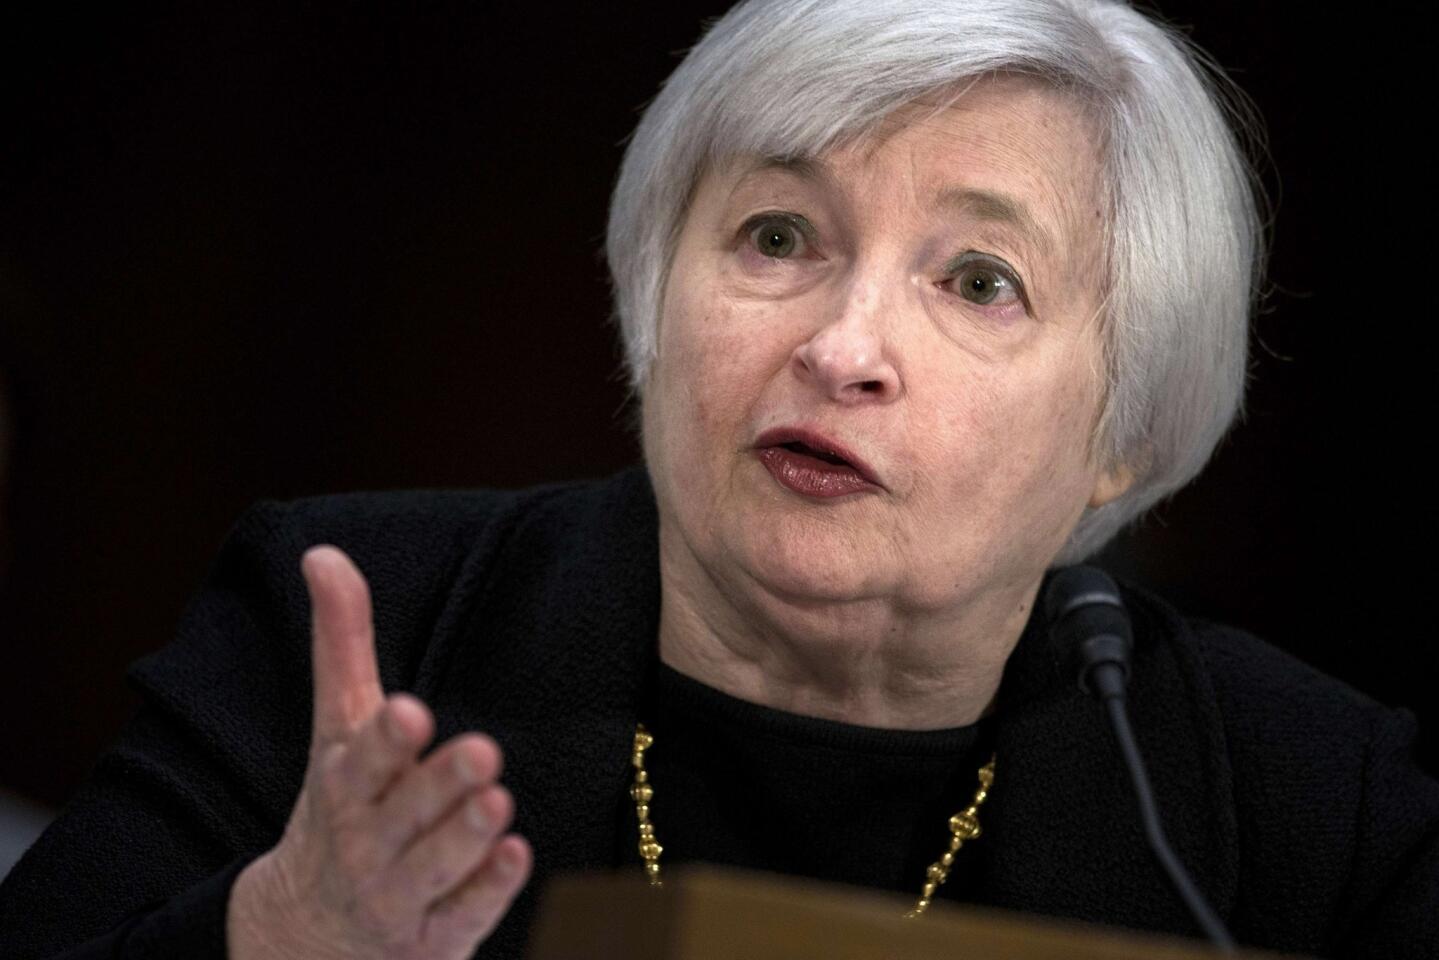 Janet L. Yellen takes over Feb. 1 as the first woman to chair the Federal Reserve as it tries to pull back a key stimulus program without derailing the recovery. Yellen, 67, a former UC Berkeley economist, has been the Fed's vice chair since 2010, serving as a close ally of outgoing chair Ben S. Bernanke in the central bank's unprecedented efforts to boost the economy after the Great Recession.